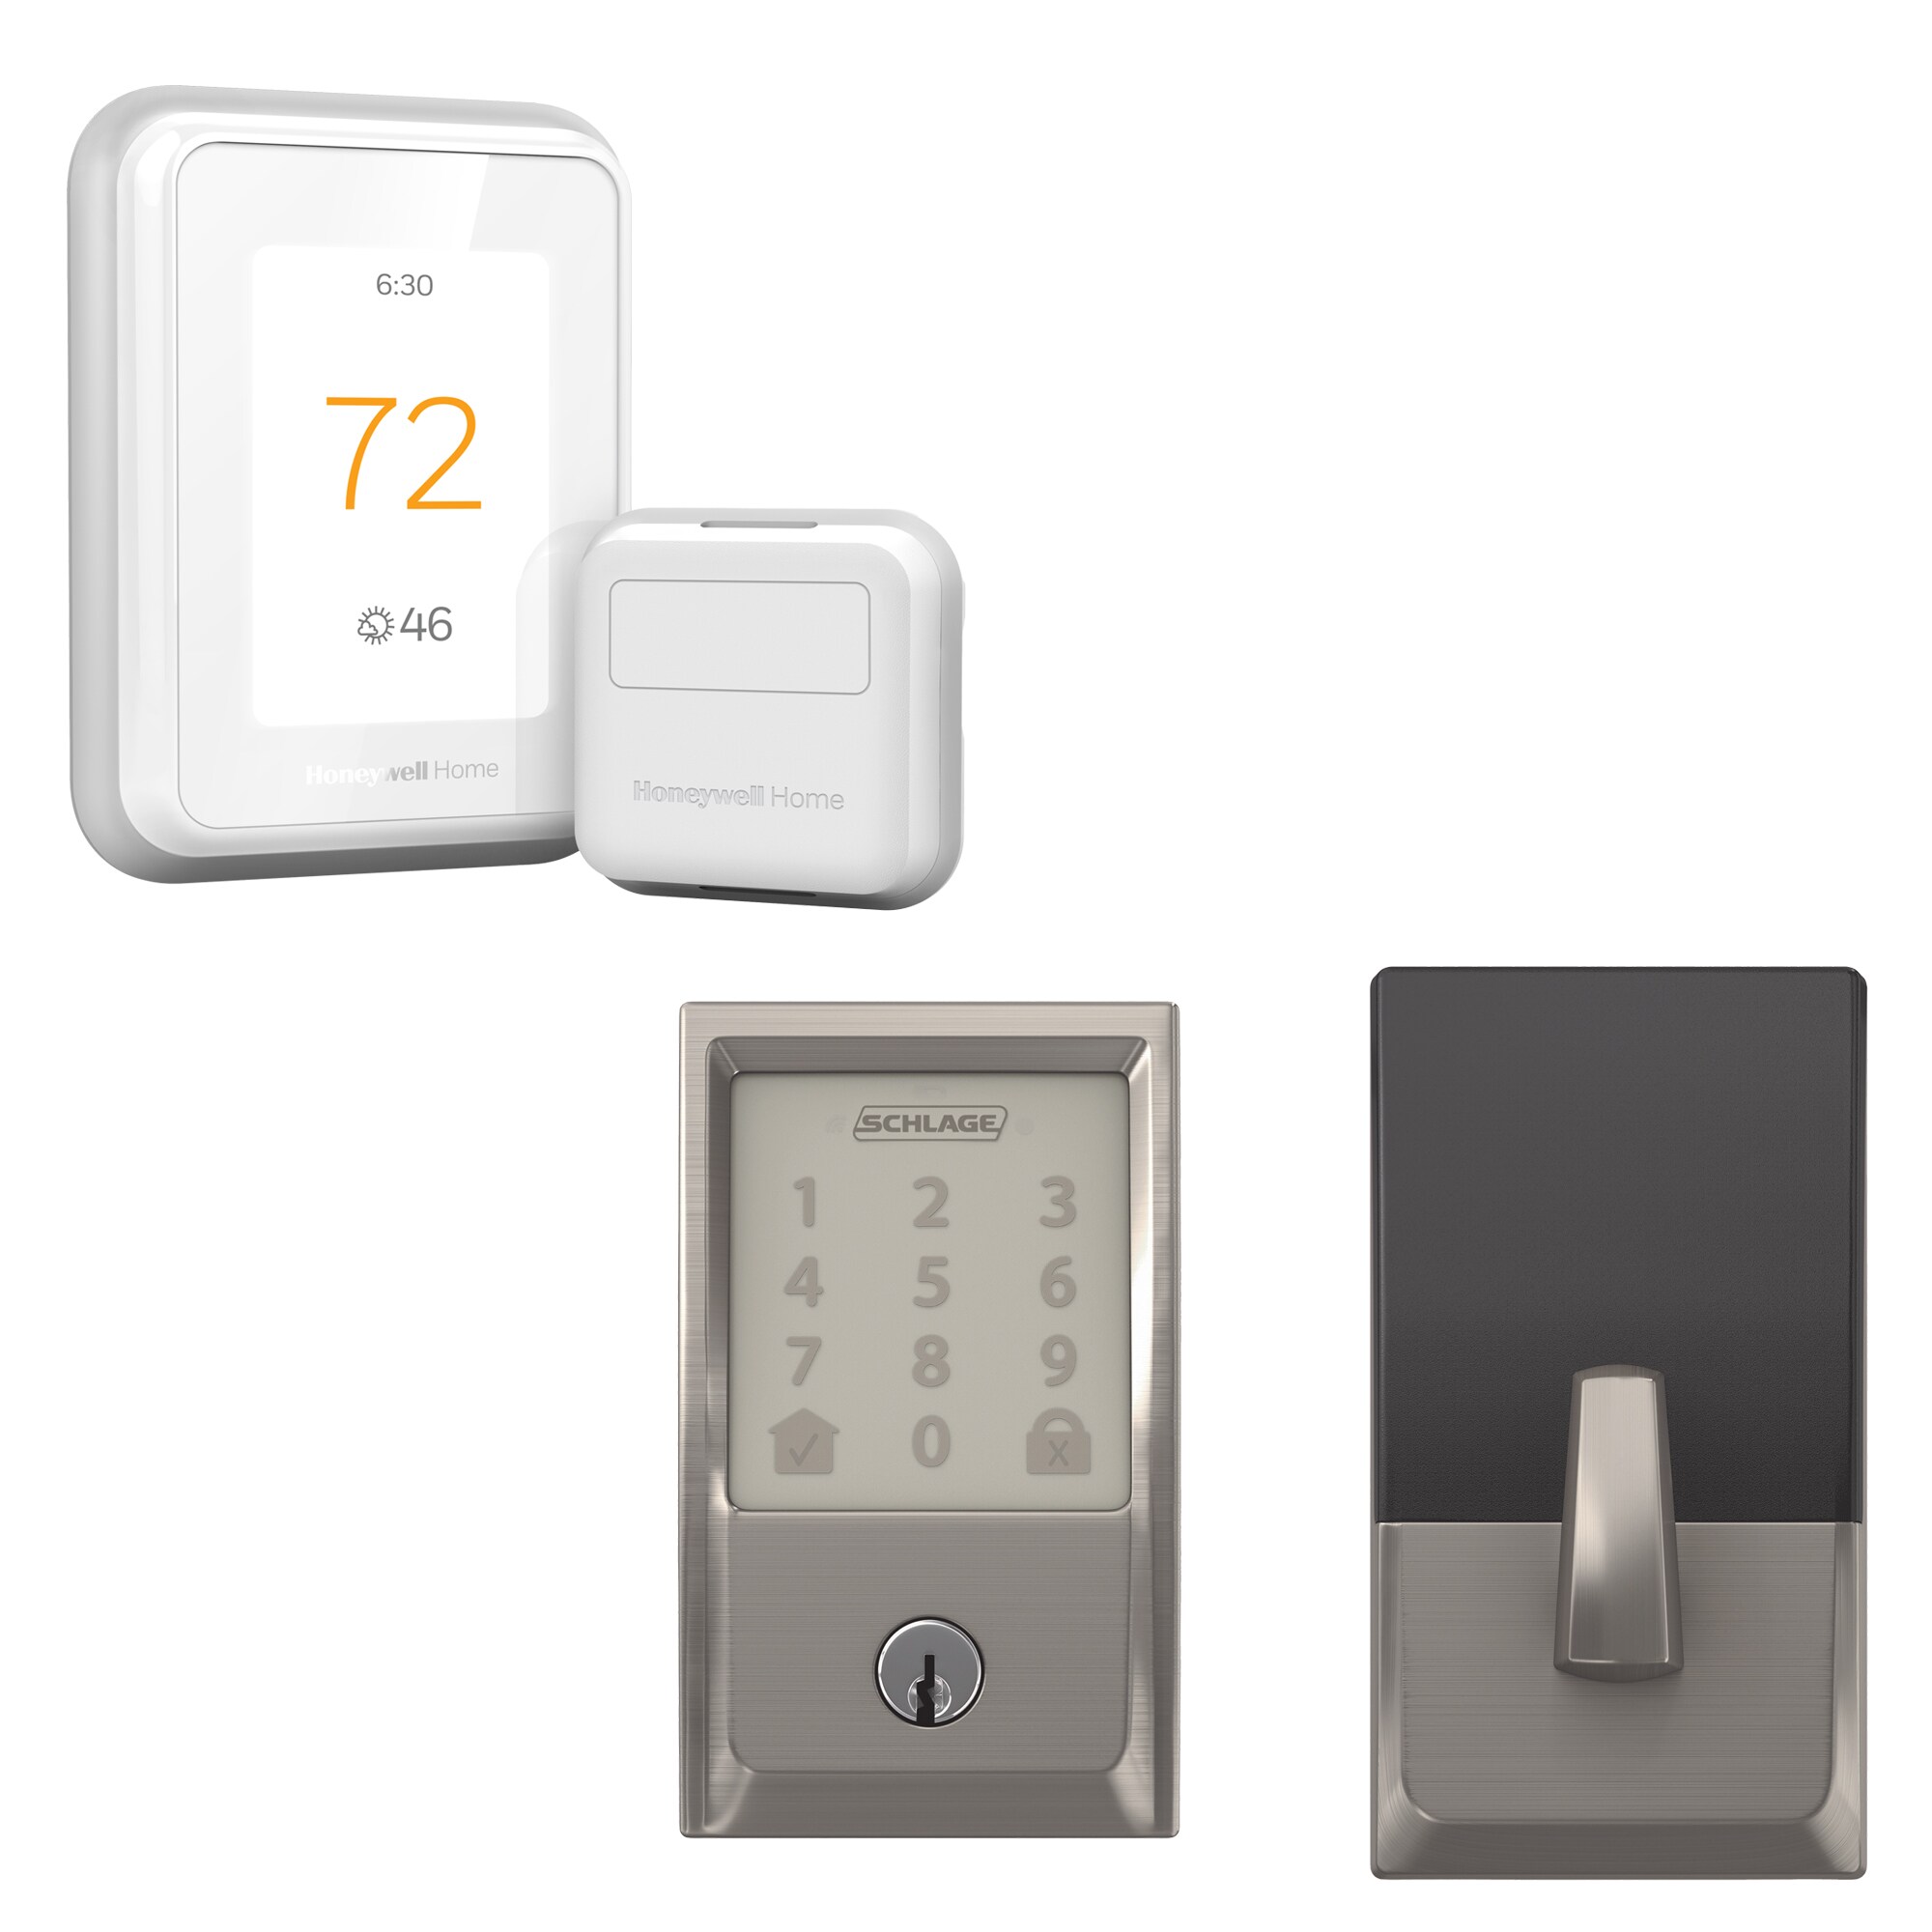 Honeywell Home T9 thermostat review: smart sensors, frustrating